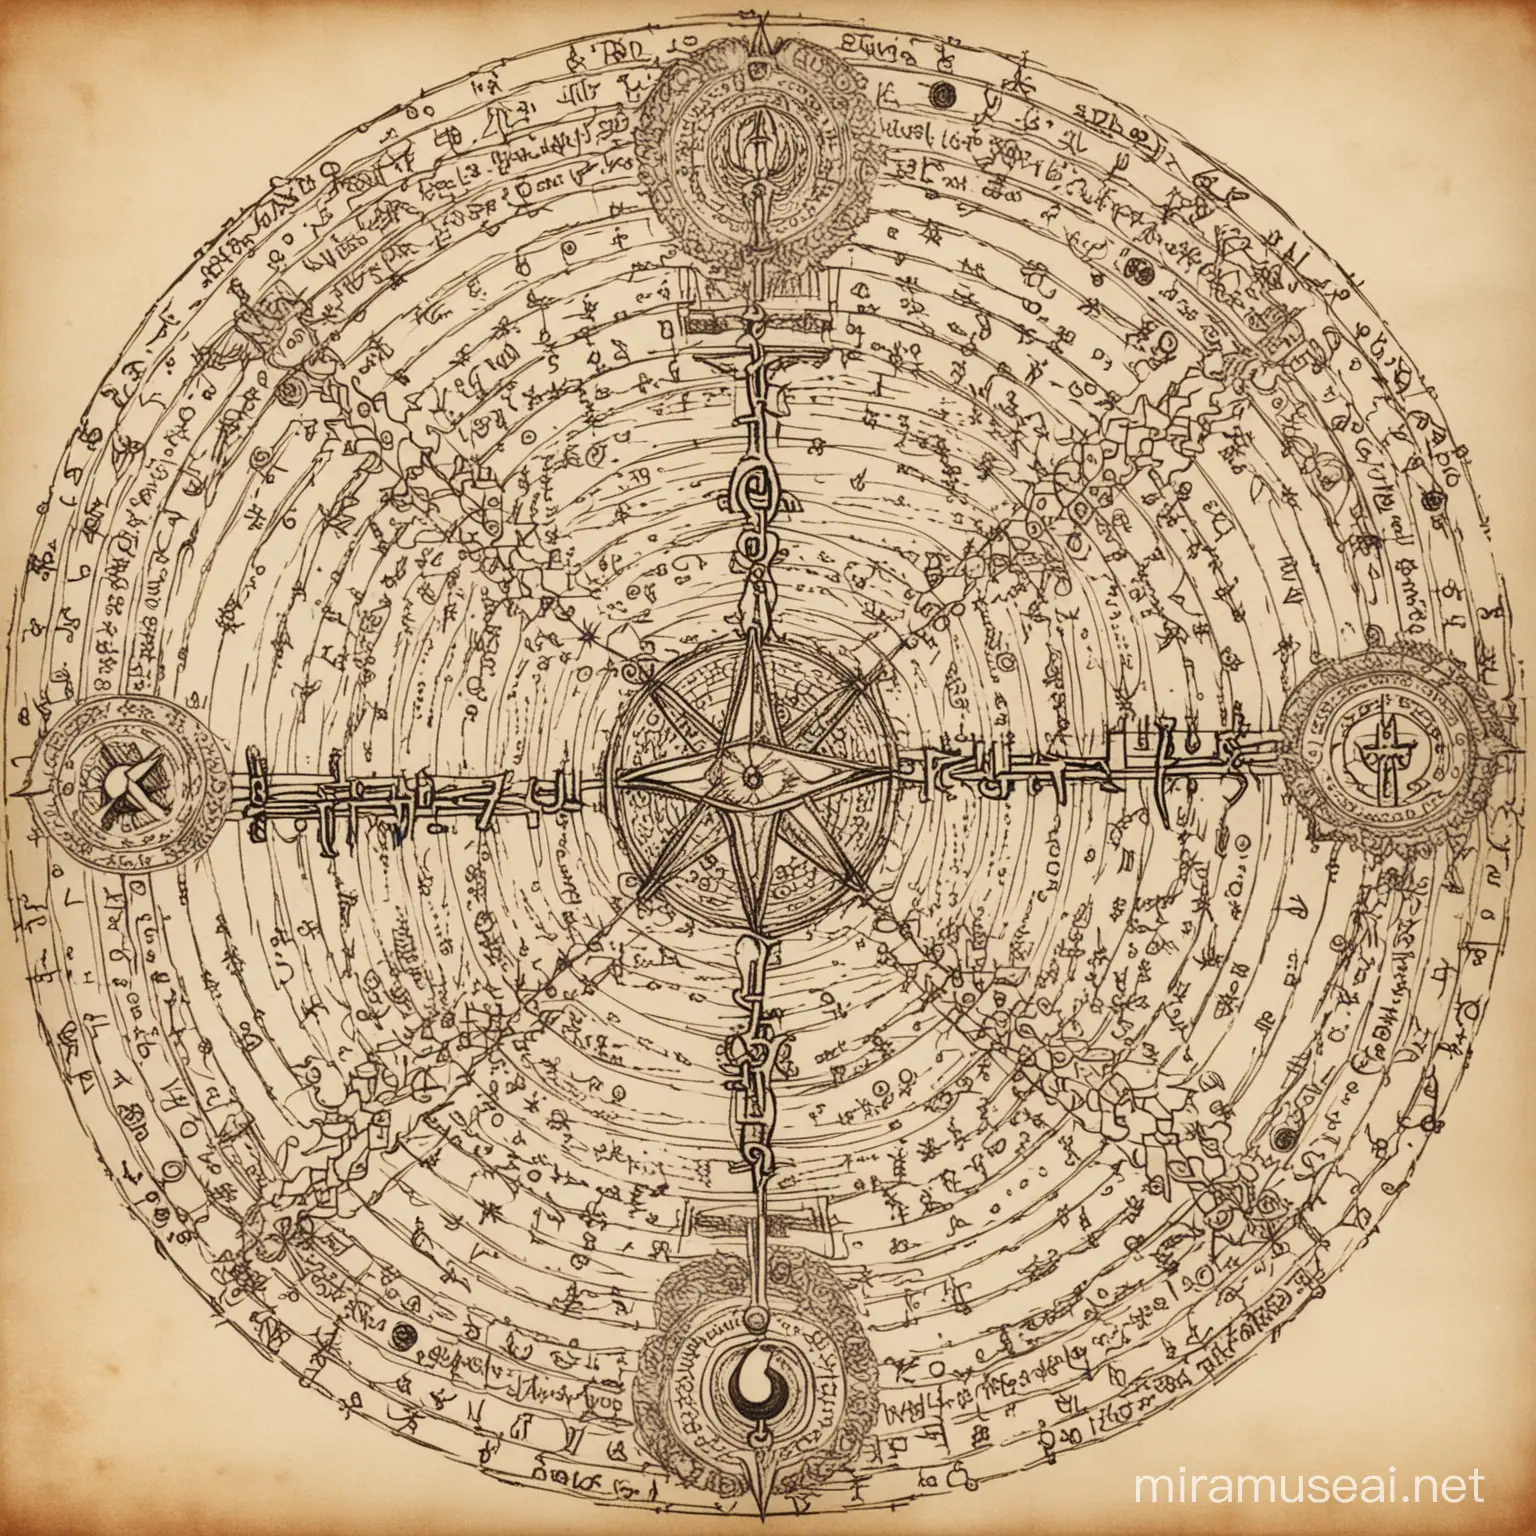 drawn design of an occult diagram showing ornate circular design for summoning a demon, with spell elements, and secret power symbols